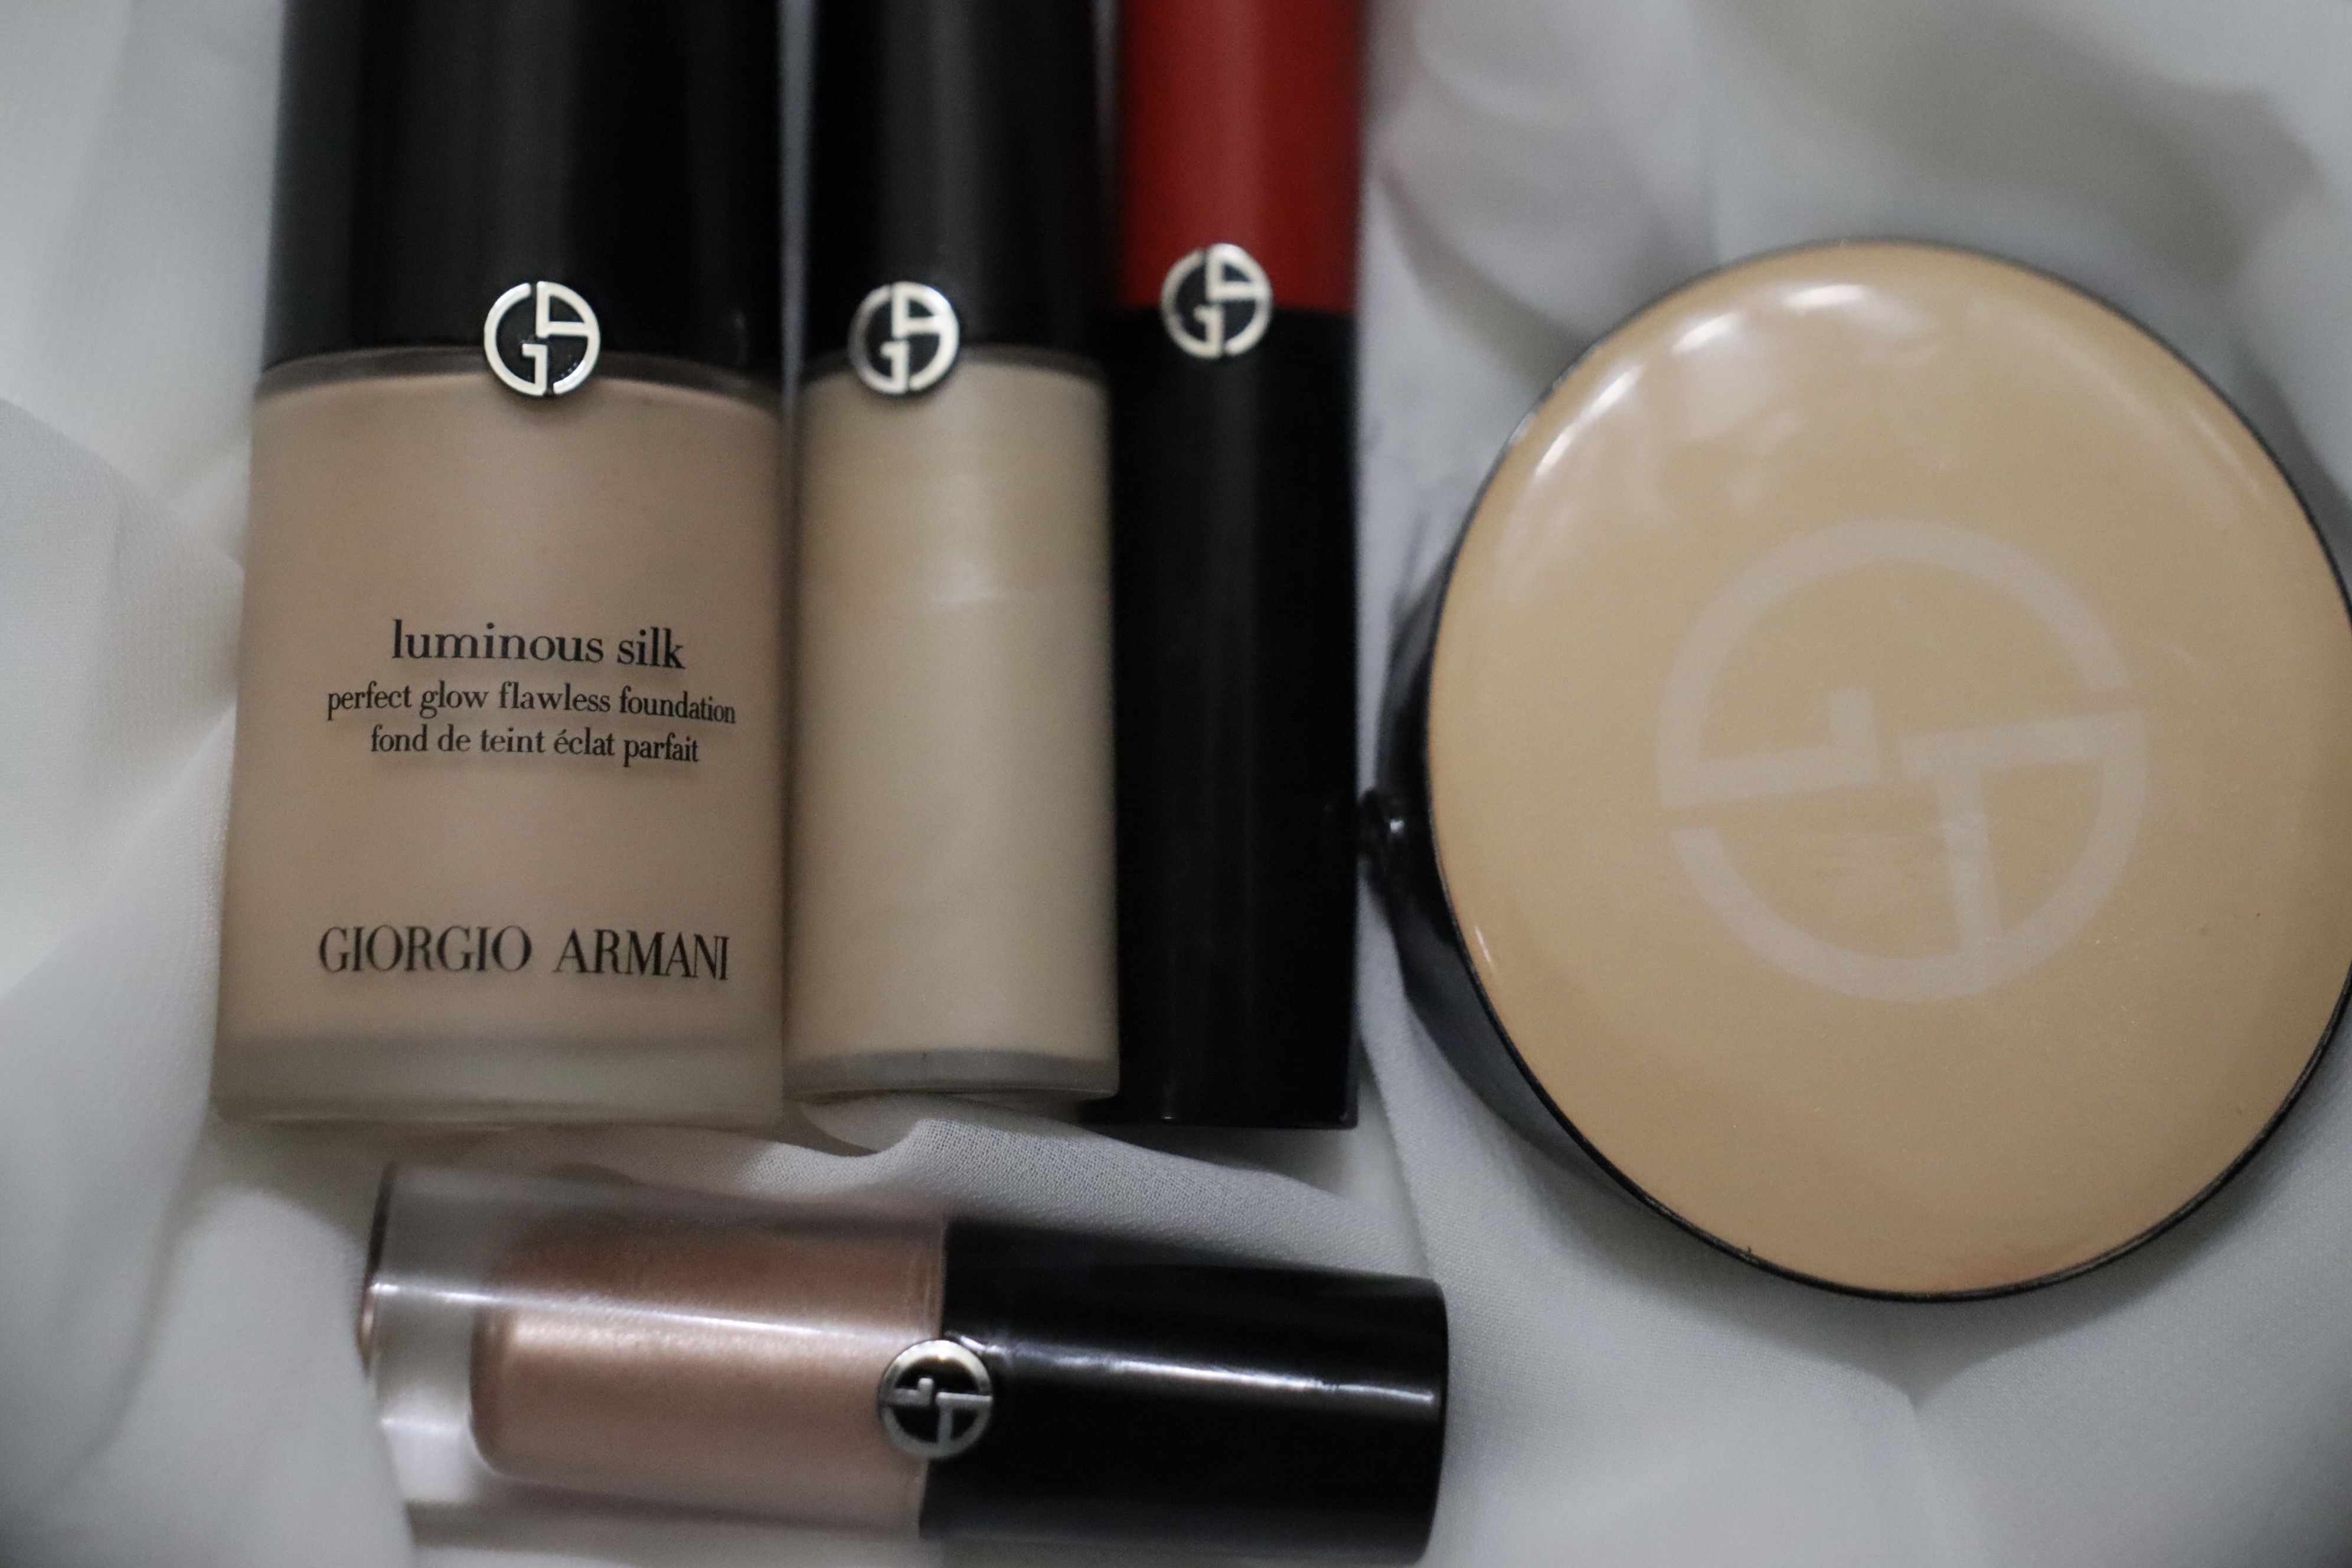 Giorgio Armani Luminous Silk foundation Review | Is it worth the hype?